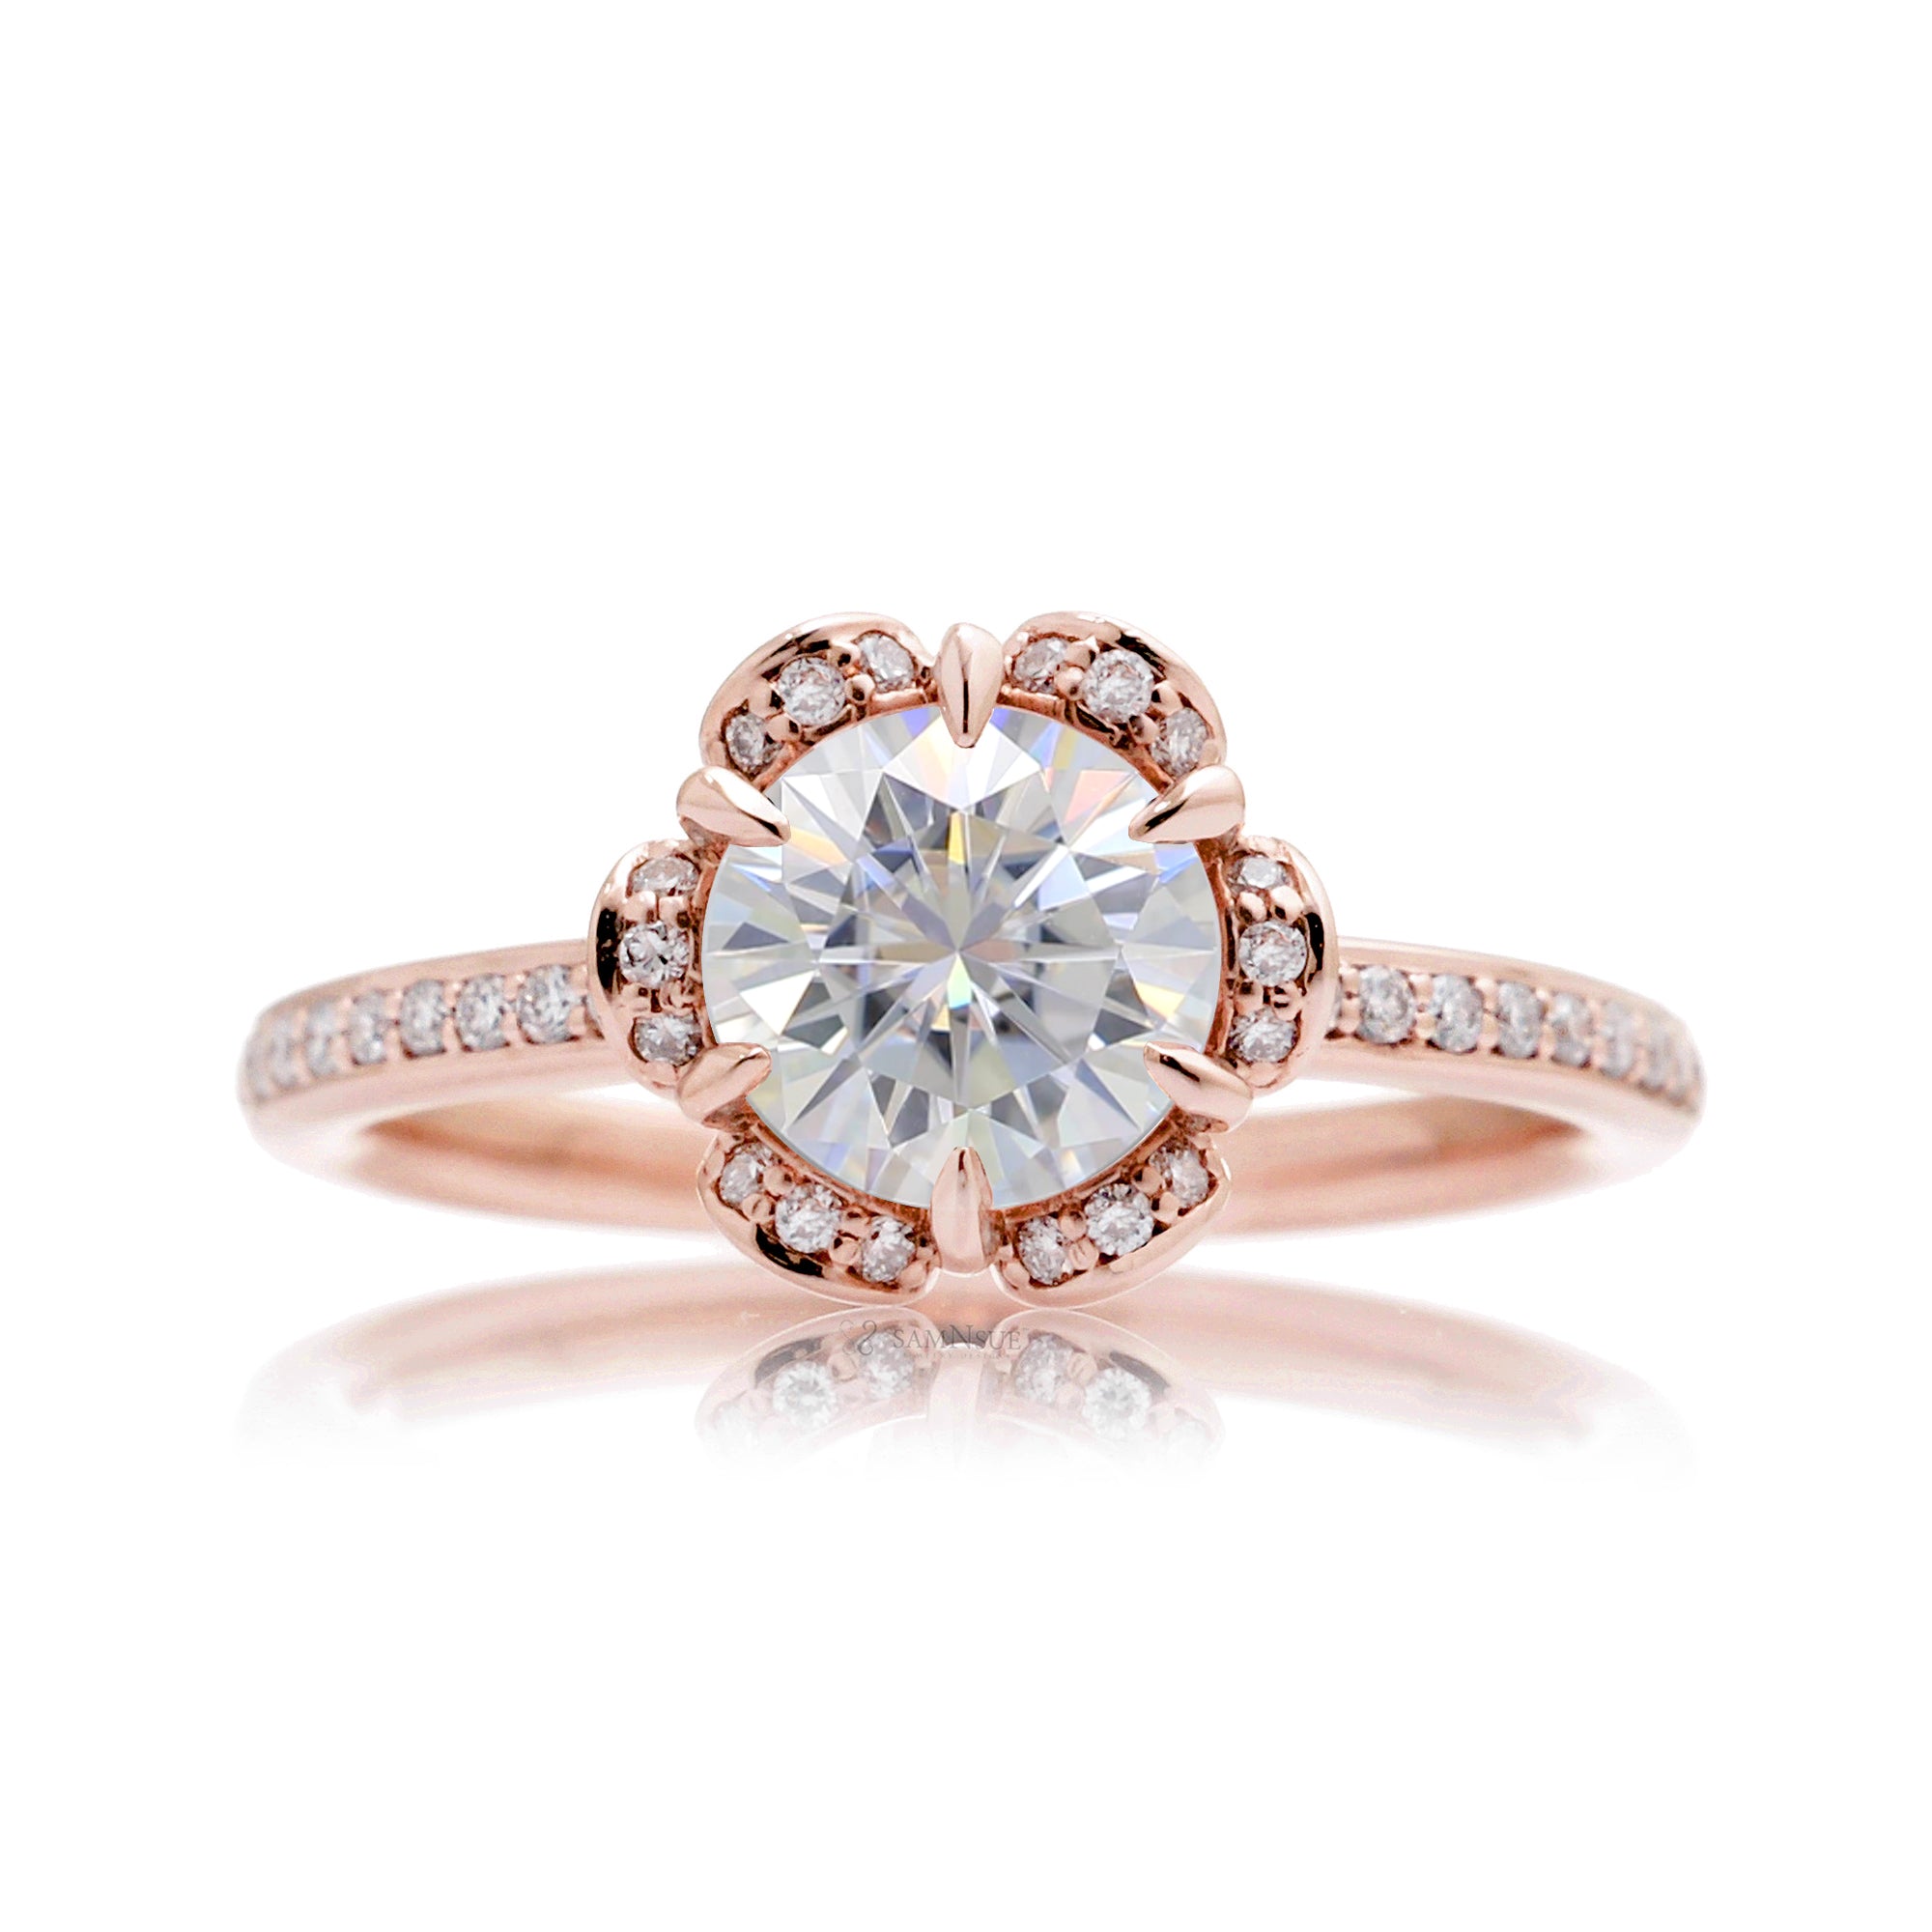 Round moissanite floral engagement ring rose gold